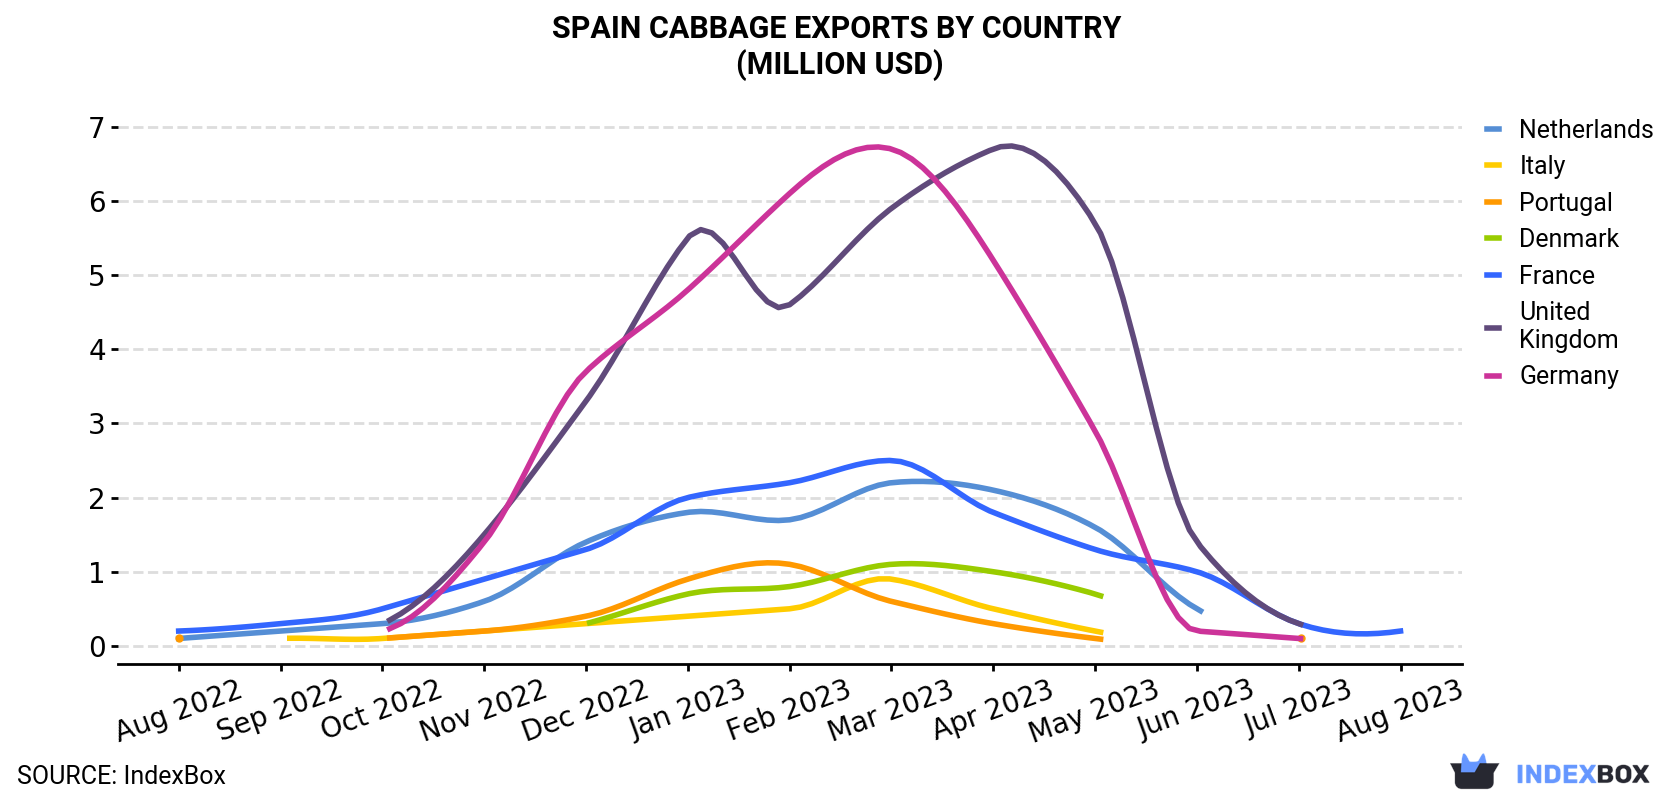 Spain Cabbage Exports By Country (Million USD)